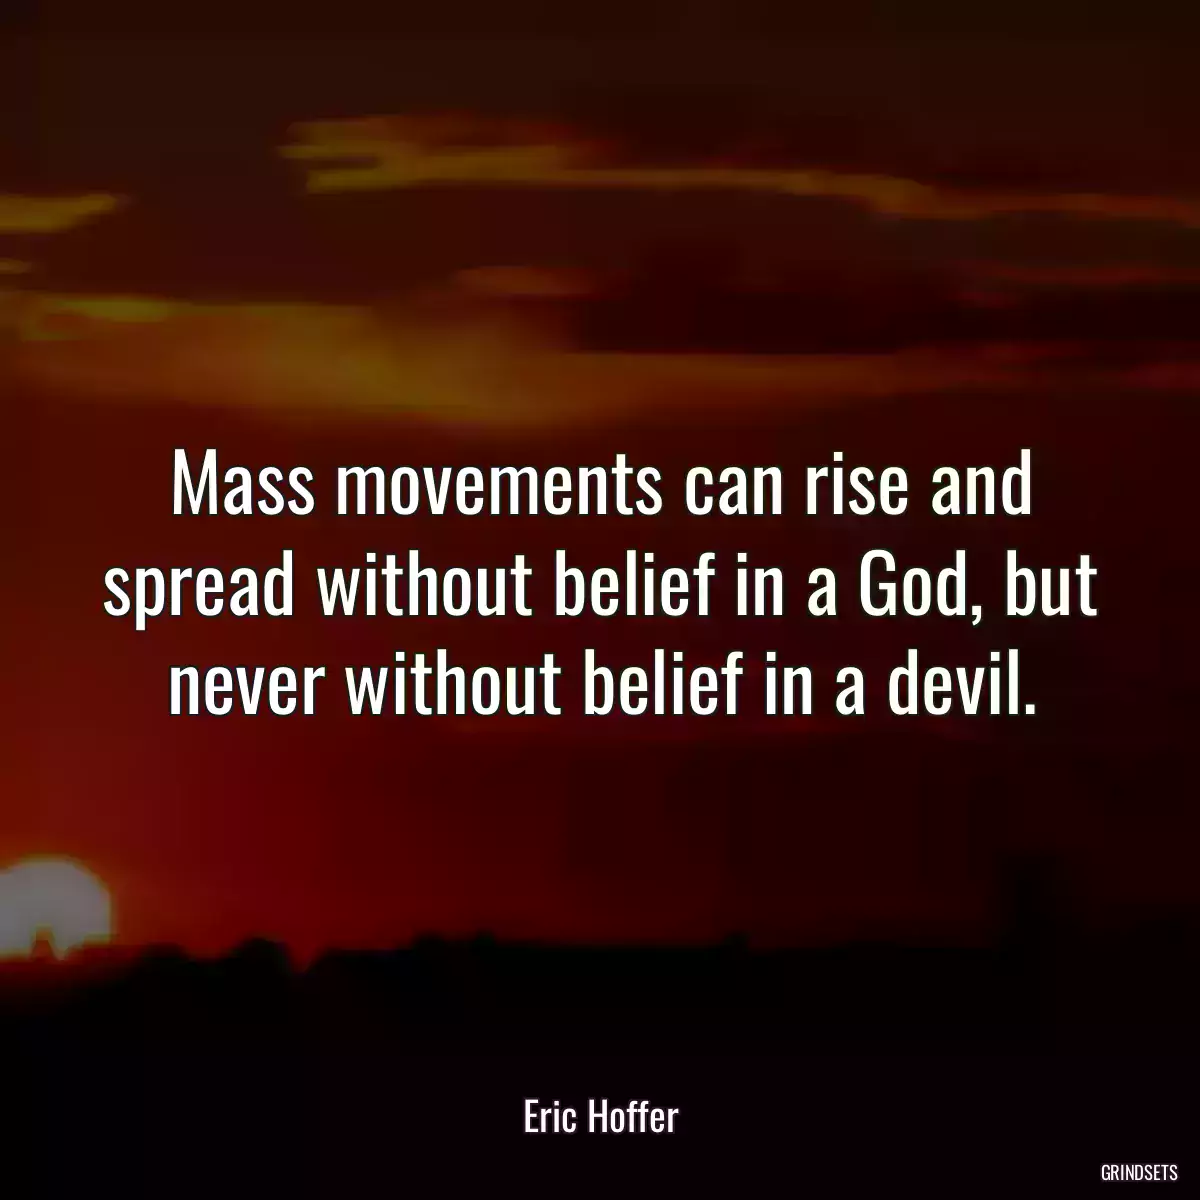 Mass movements can rise and spread without belief in a God, but never without belief in a devil.